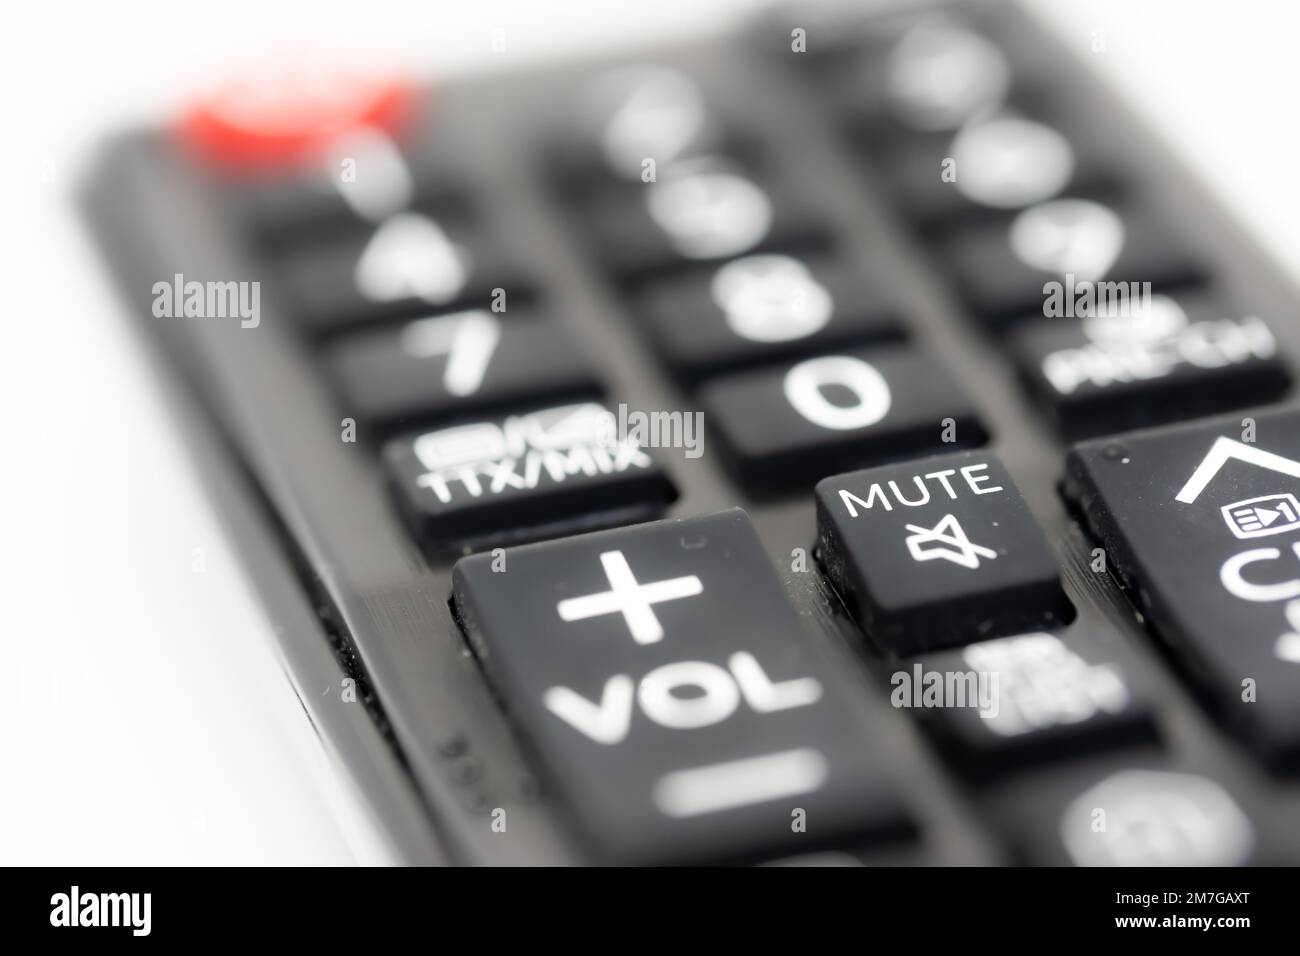 TV remote control with focus on volume and mute buttons, concept of deafness Stock Photo